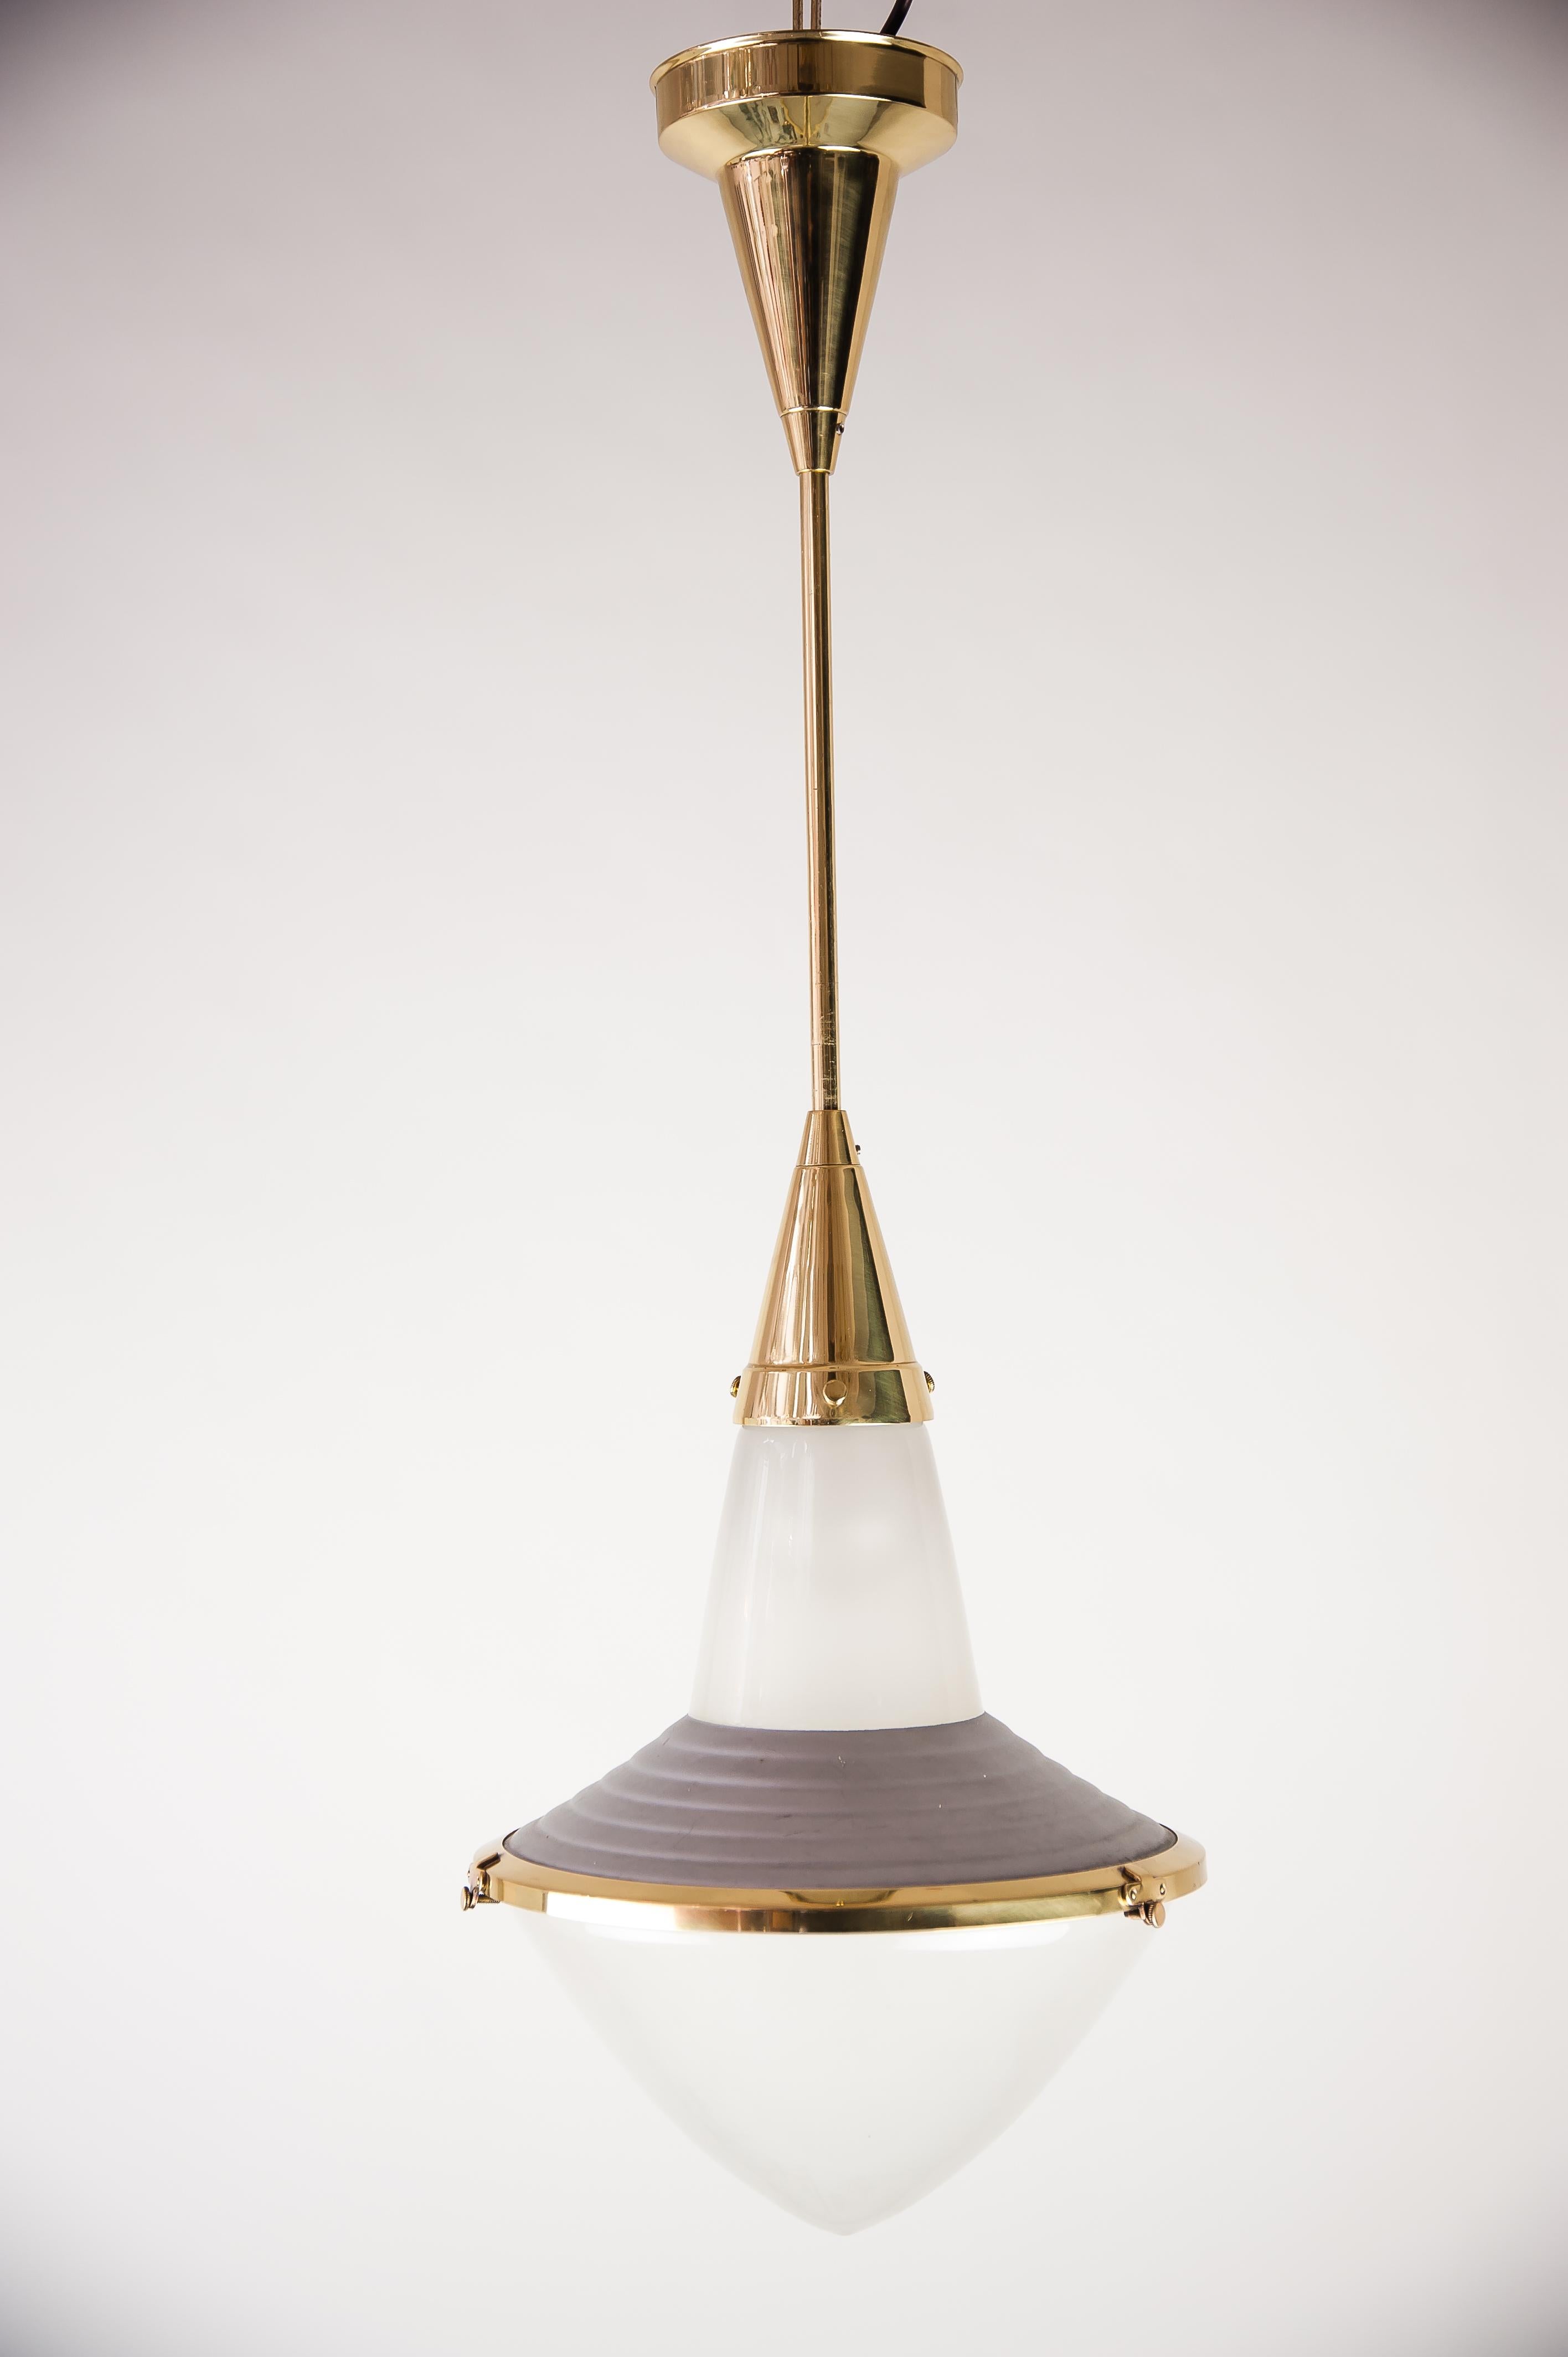 Zeiss Ikon by Adolf Meyer Bauhaus Art Deco Lamp, Germany, circa 1930s For Sale 2